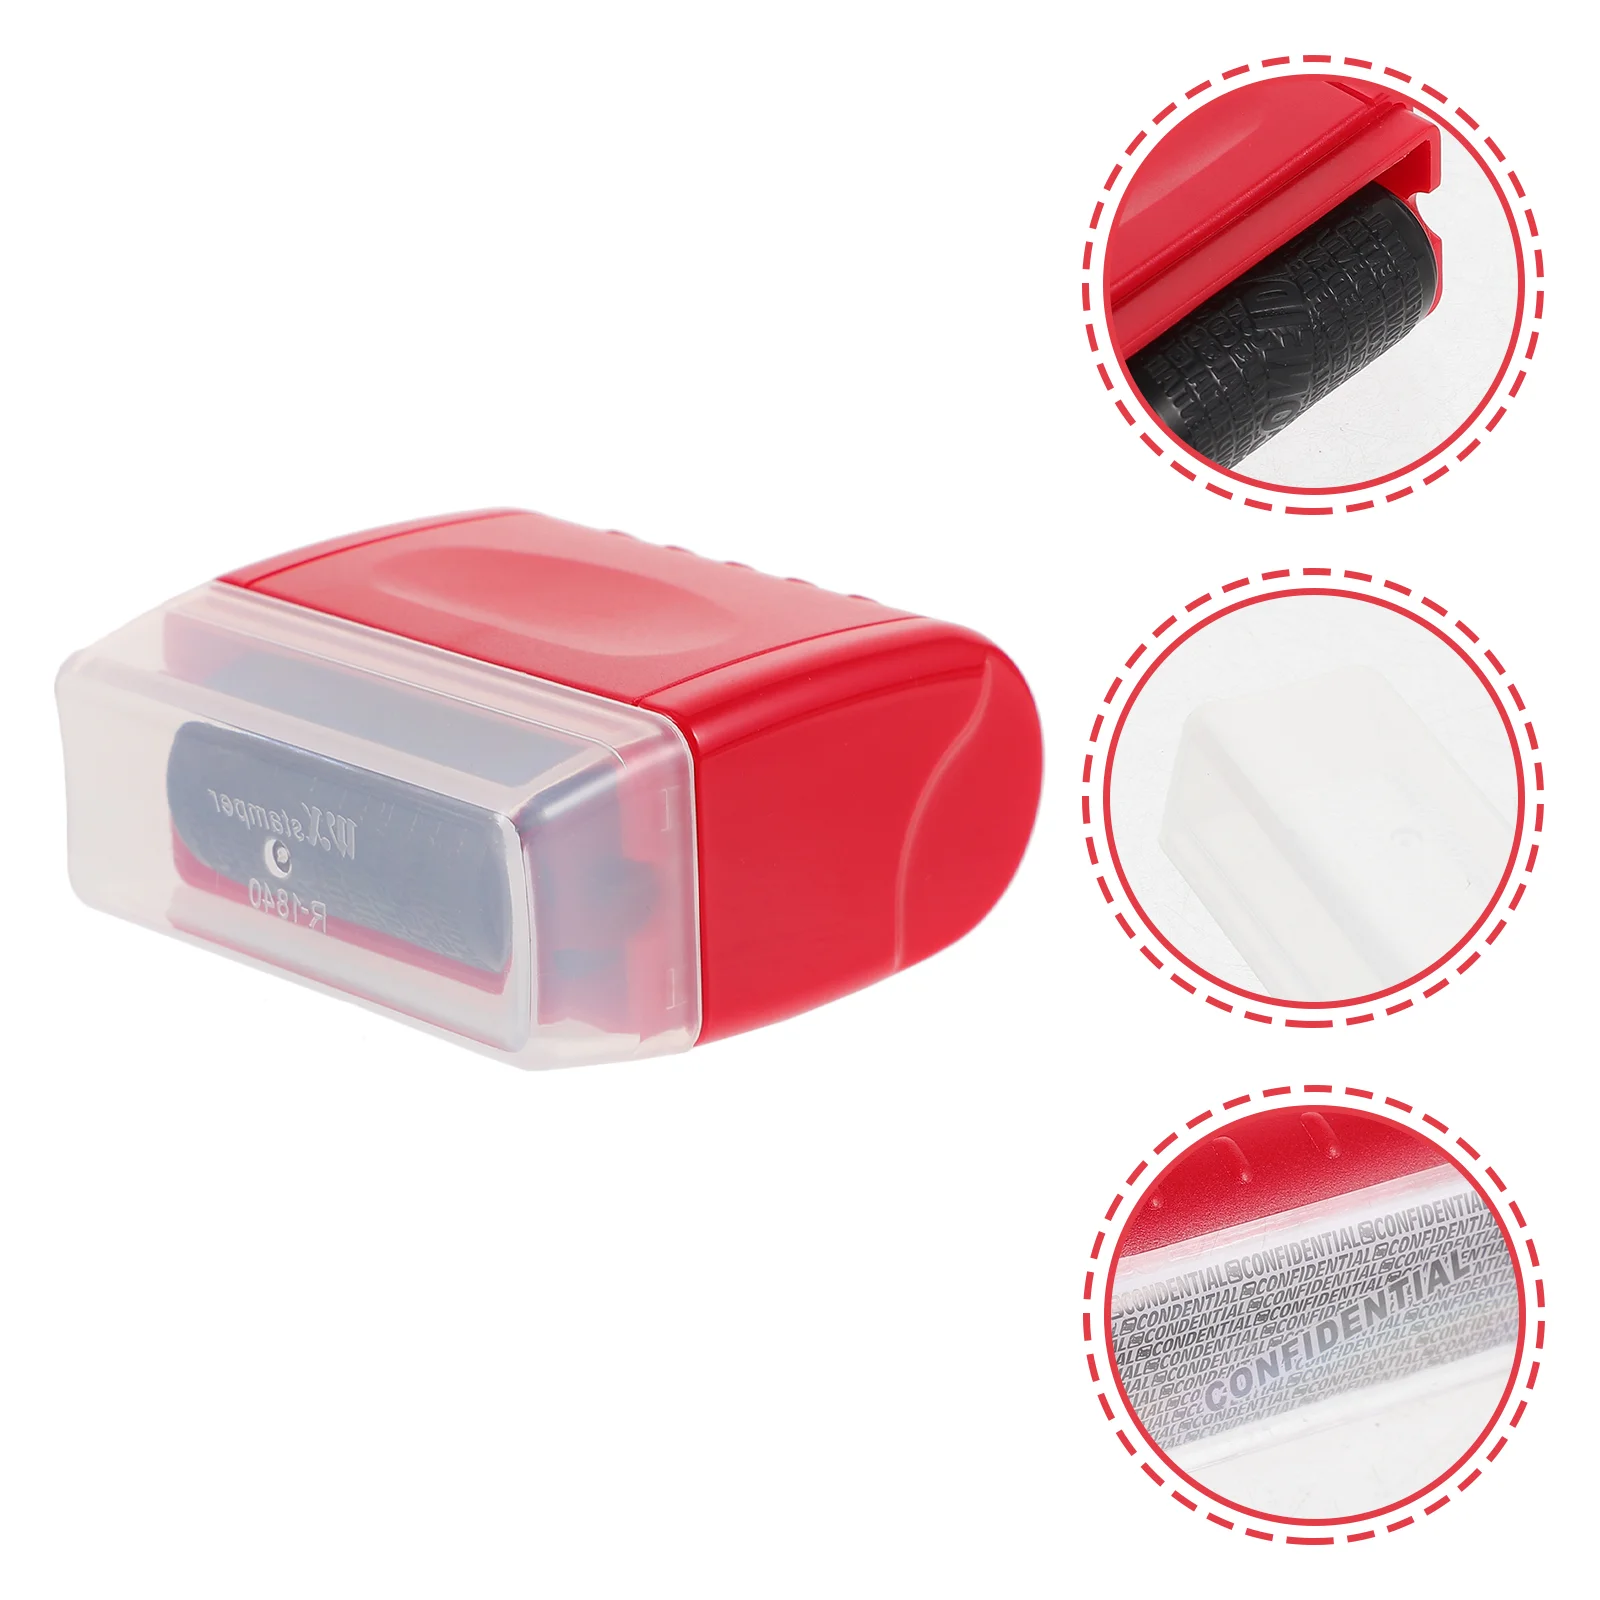 

Confidentiality Seal Roller Stamp for Home Convenient Postage Stamps Portable Privacy Multi-function Cover up Tool